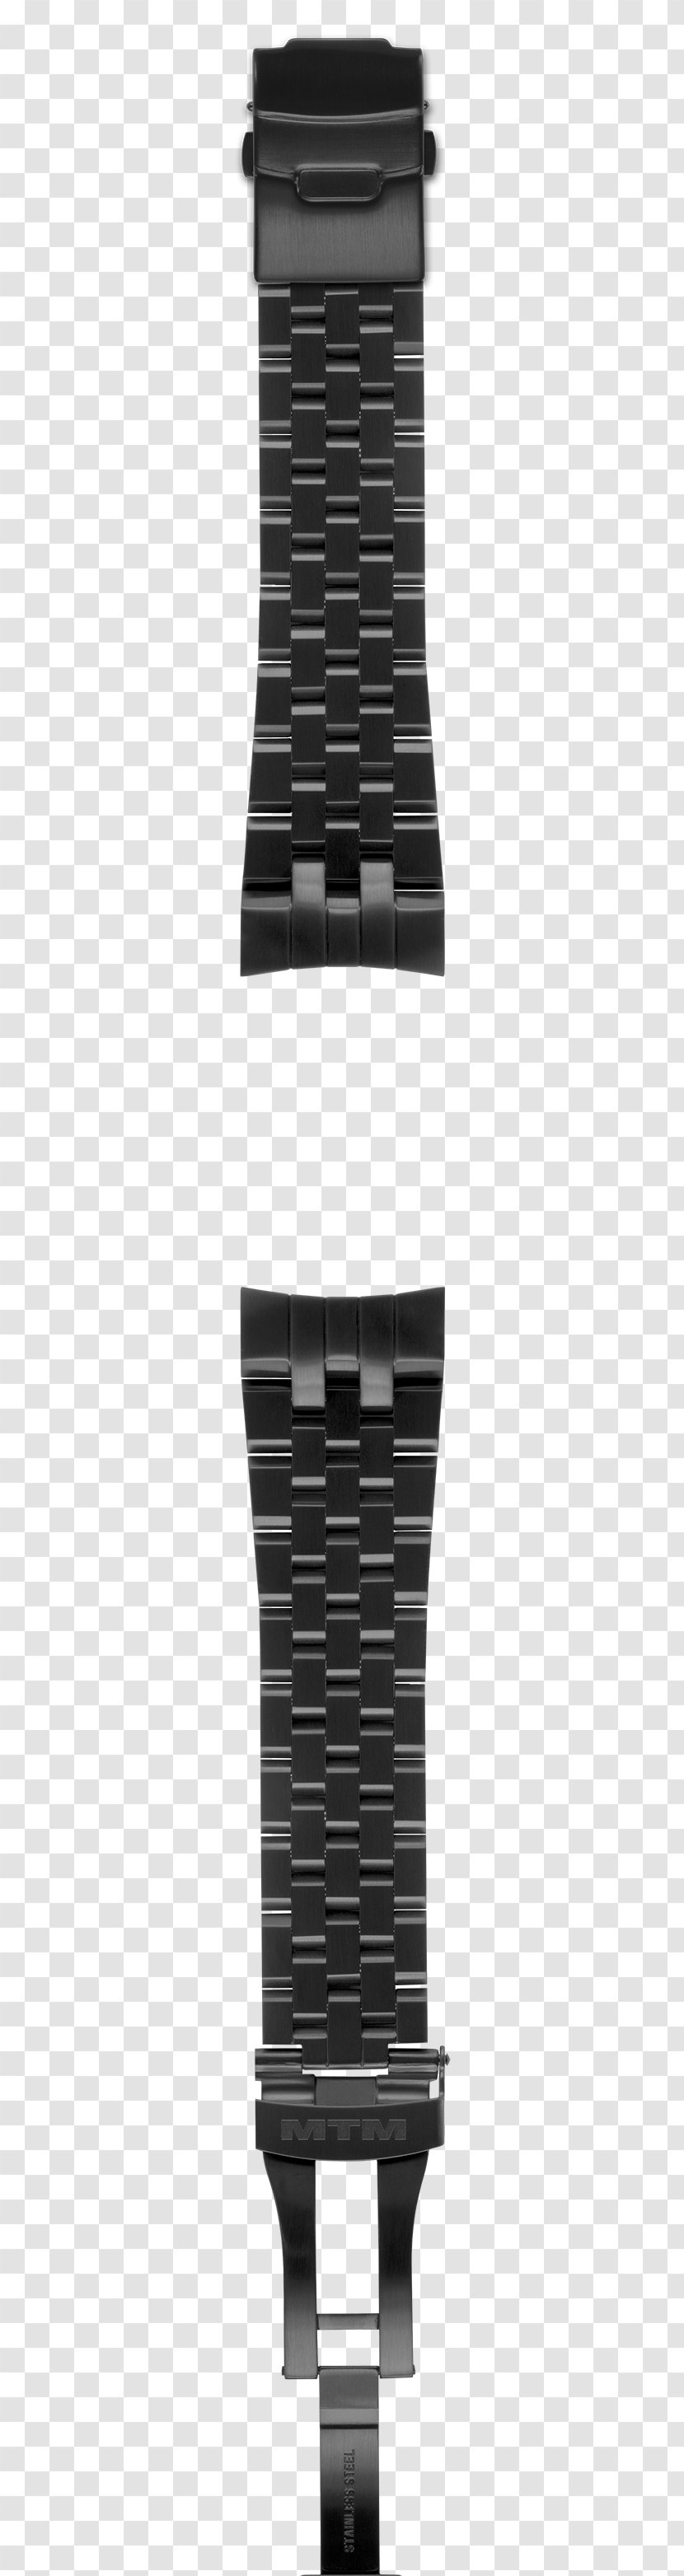 Military Watch Strap - Warrior - Metal Band Transparent PNG